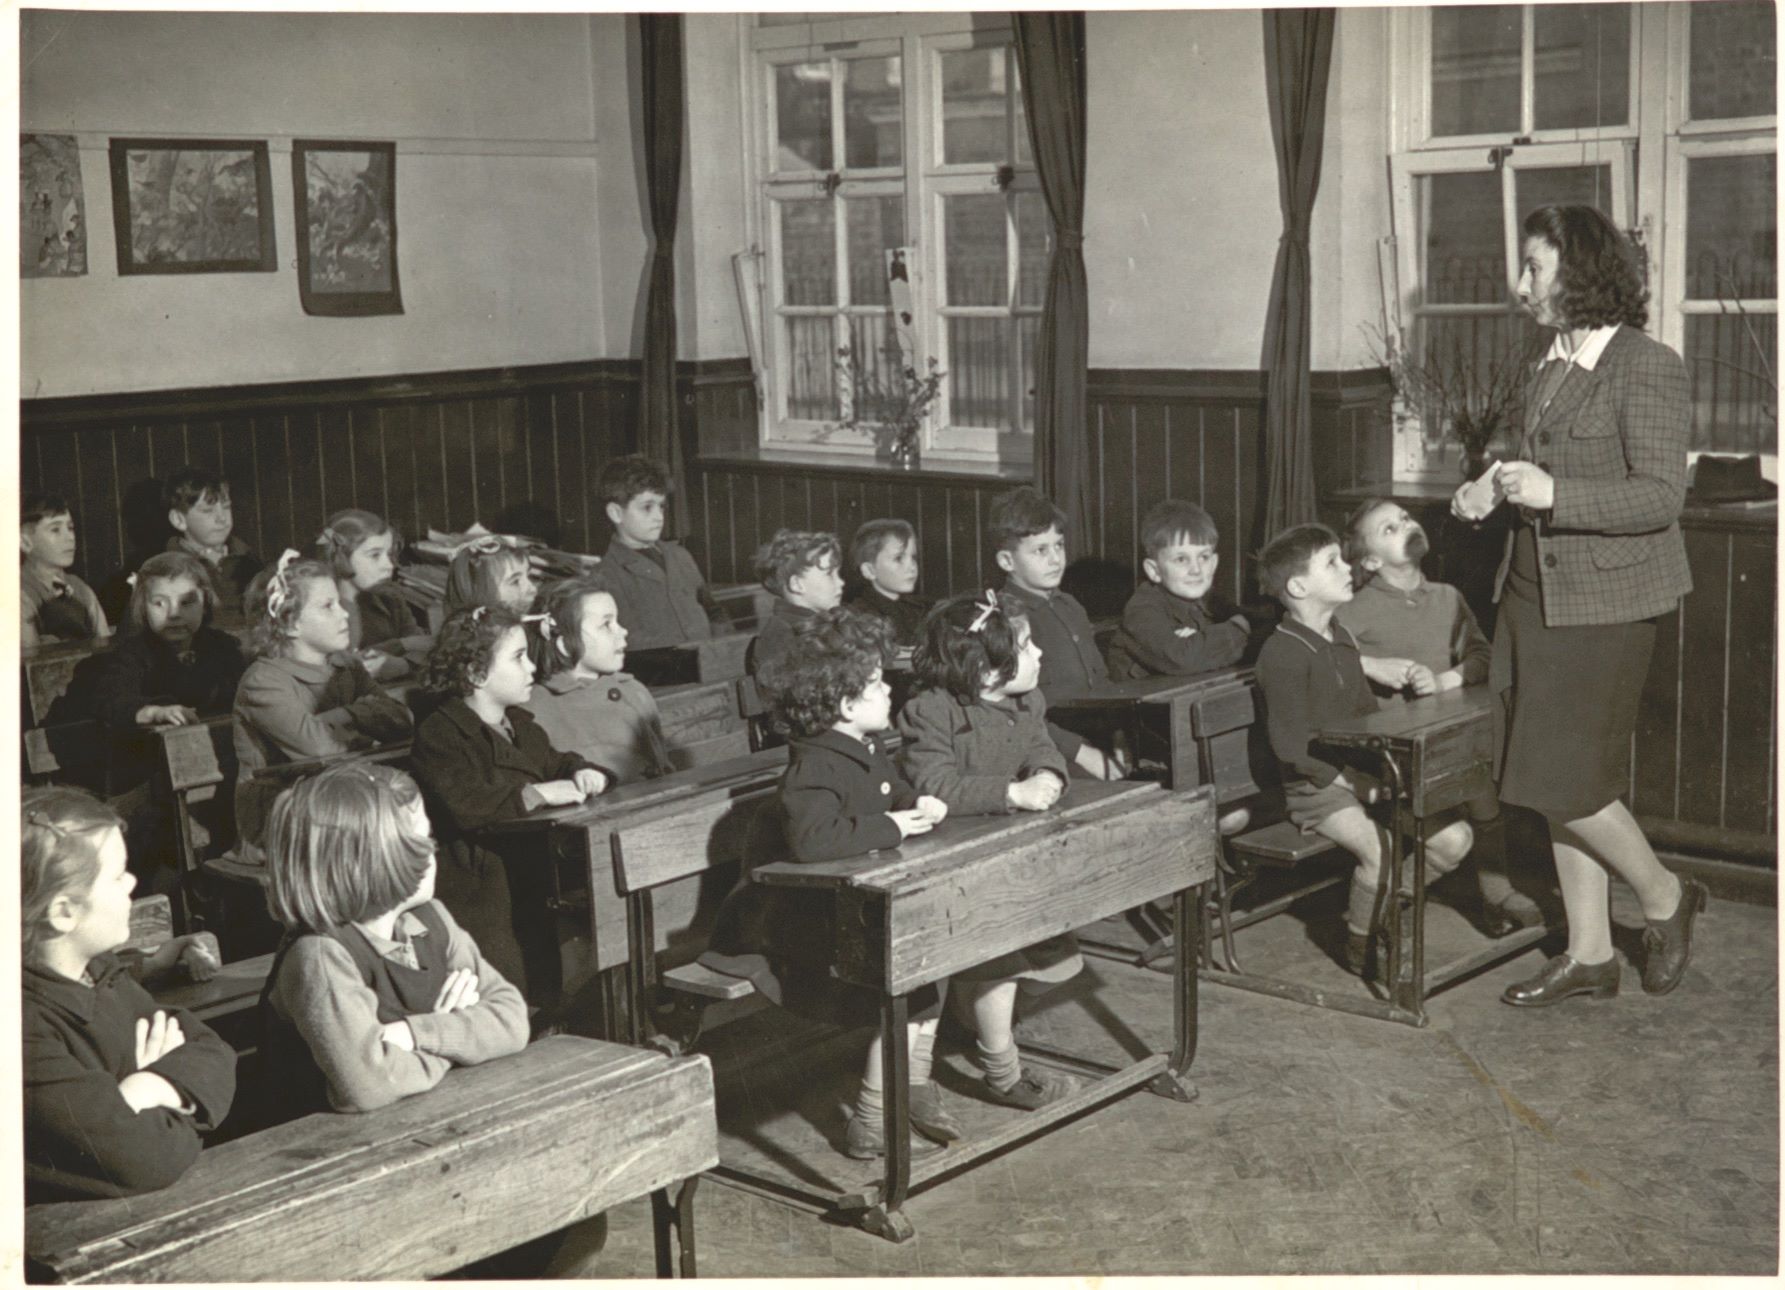 20-facts-about-schools-100-years-ago